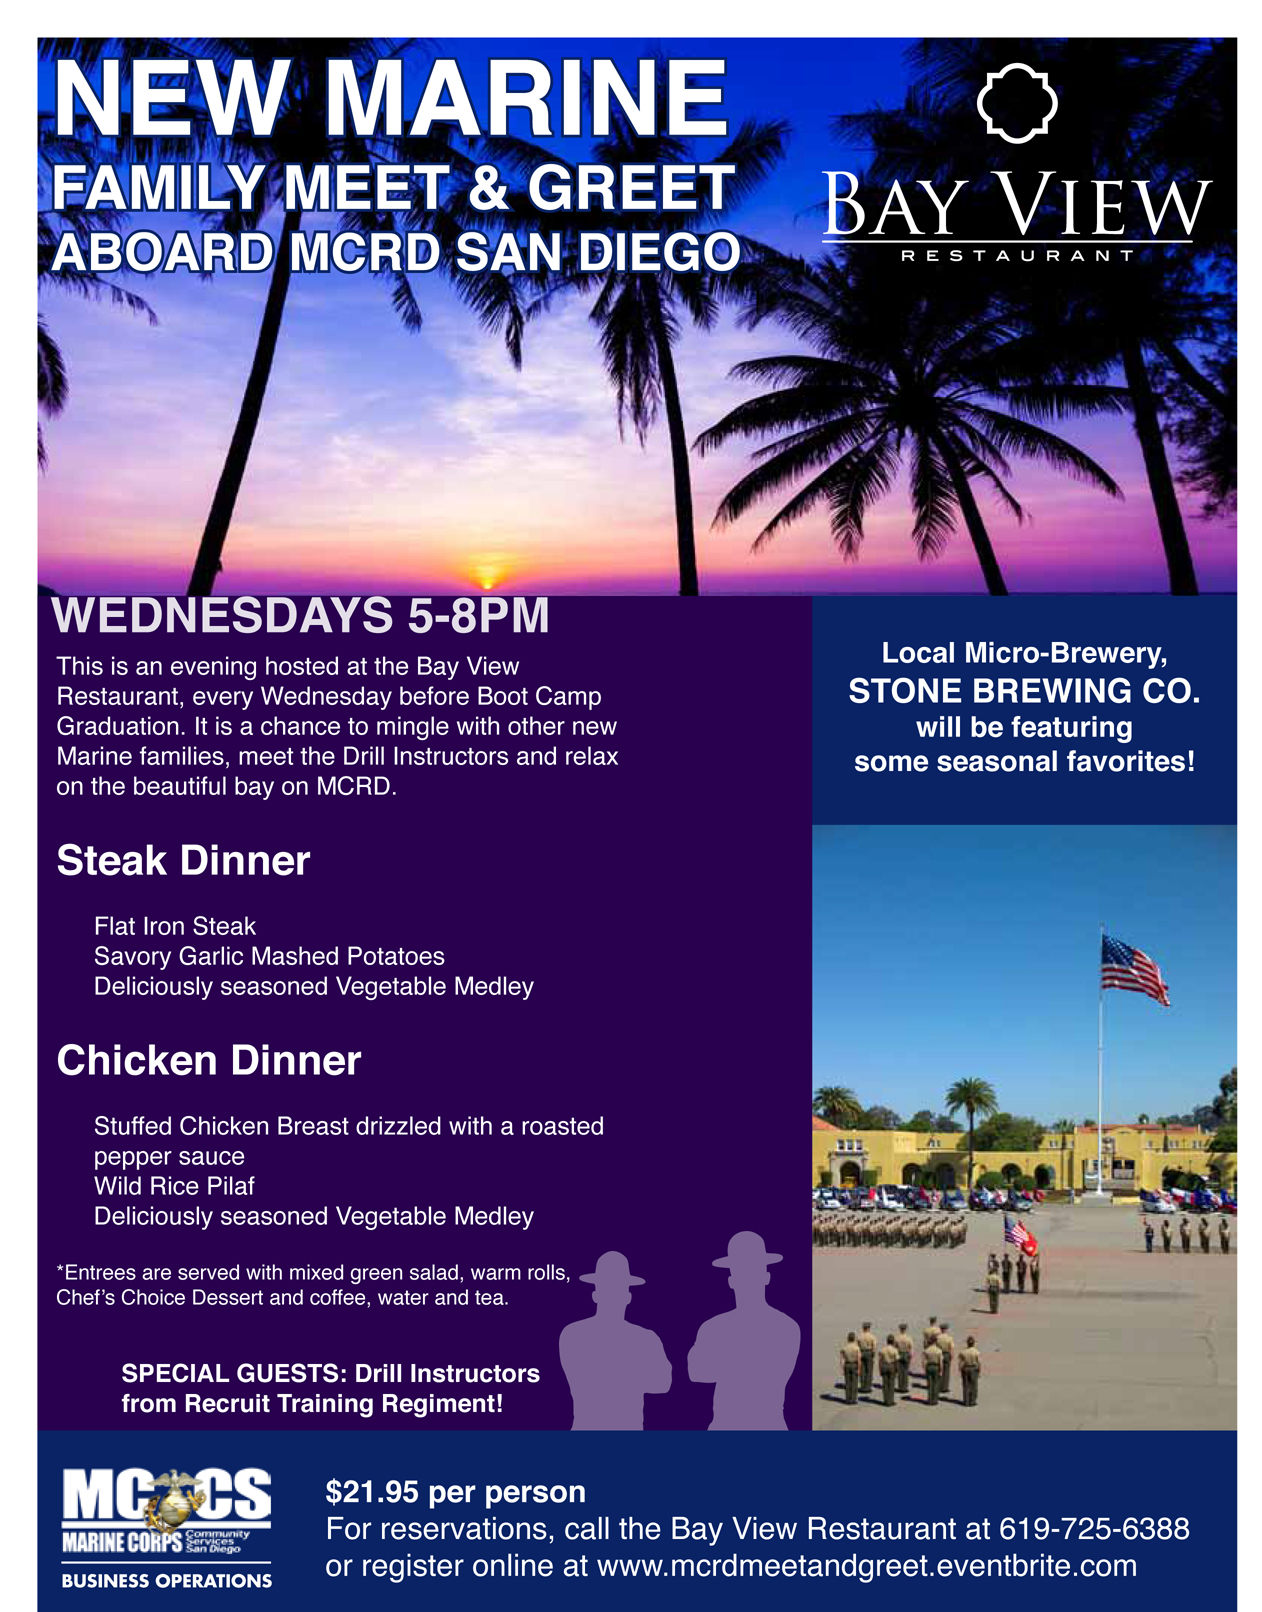 Official New Marine Family Meet and Greet at the Bay View on MCRD San Diego